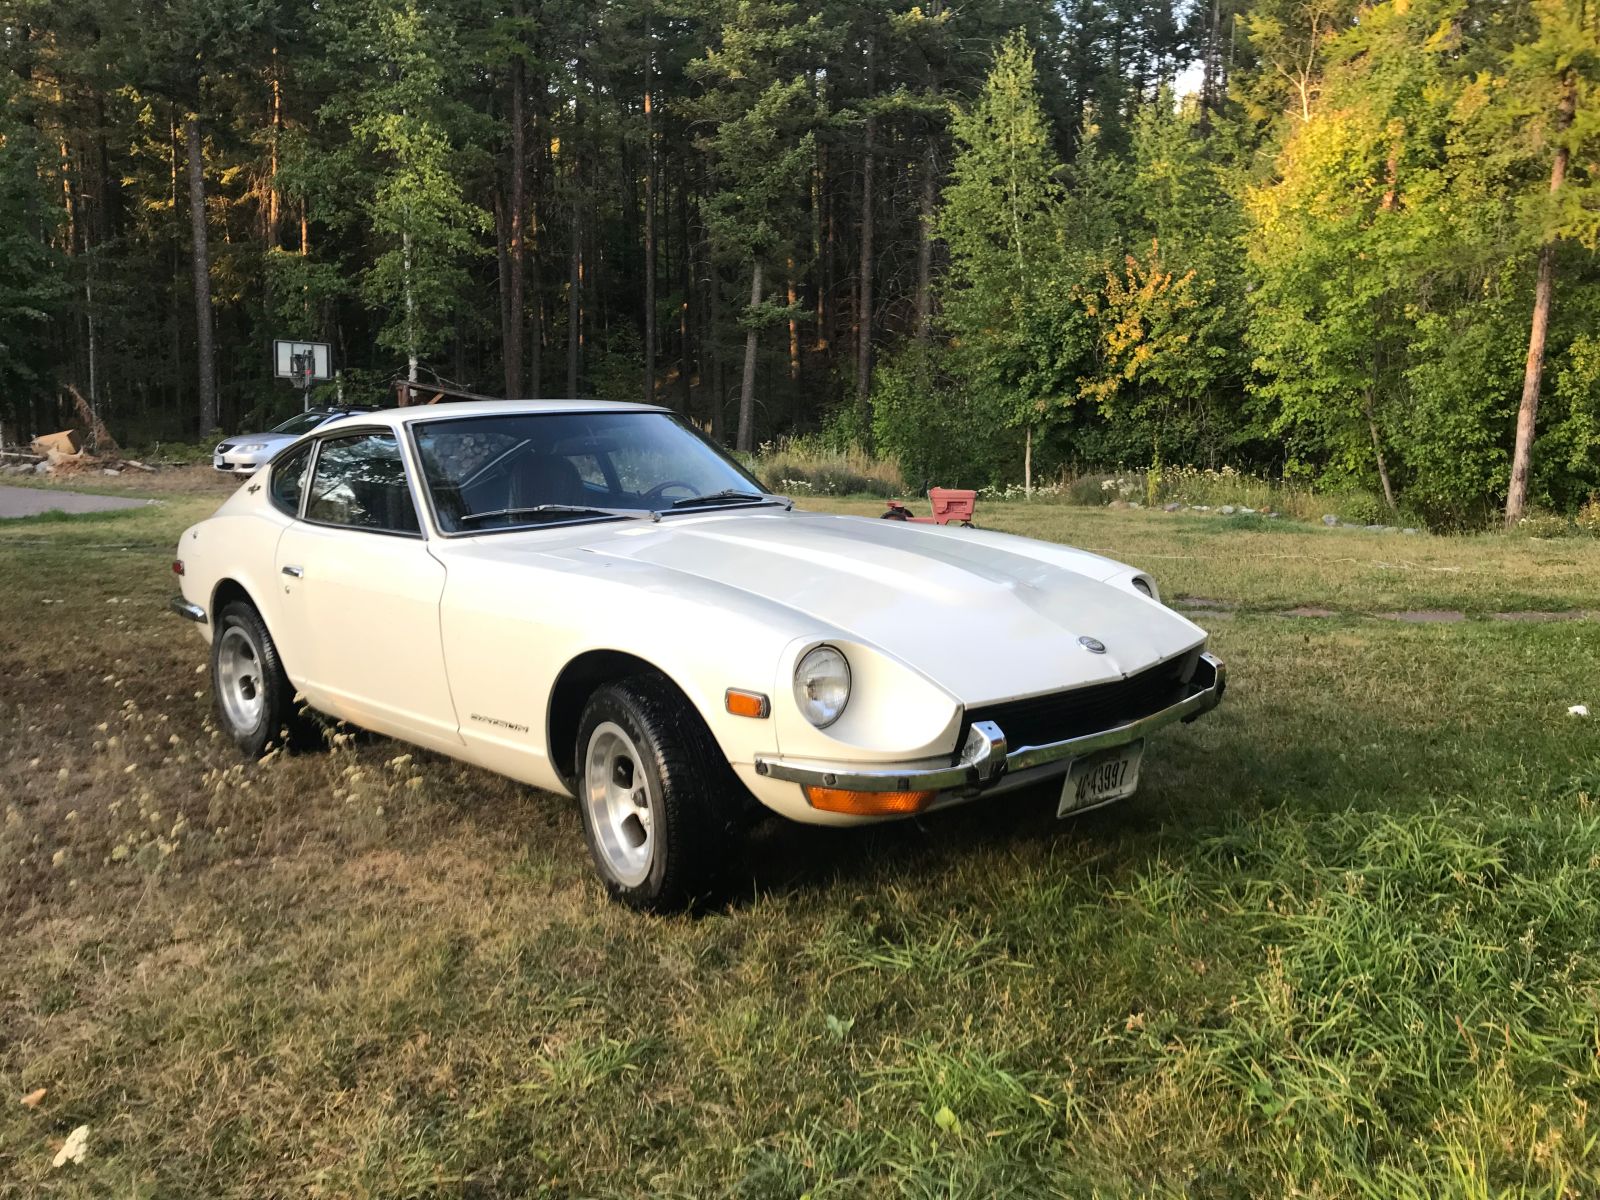 The 1970 sitting in my yard last summer after a wash.